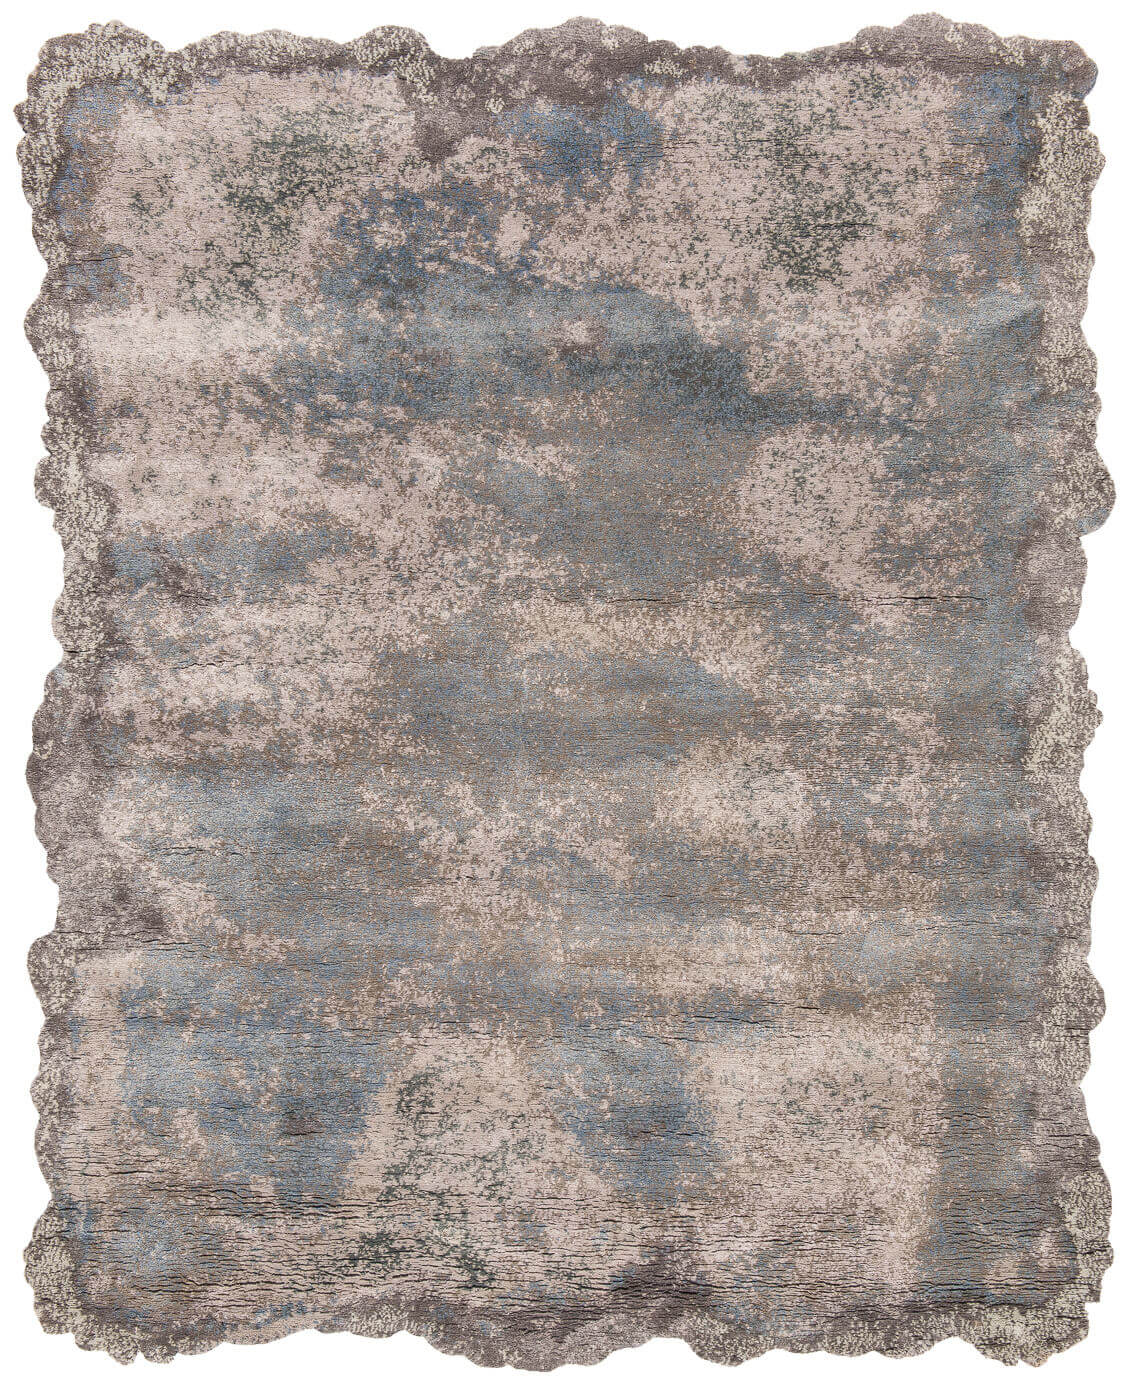 Riot Grey Hand-woven Luxury Rug ☞ Size: 300 x 400 cm